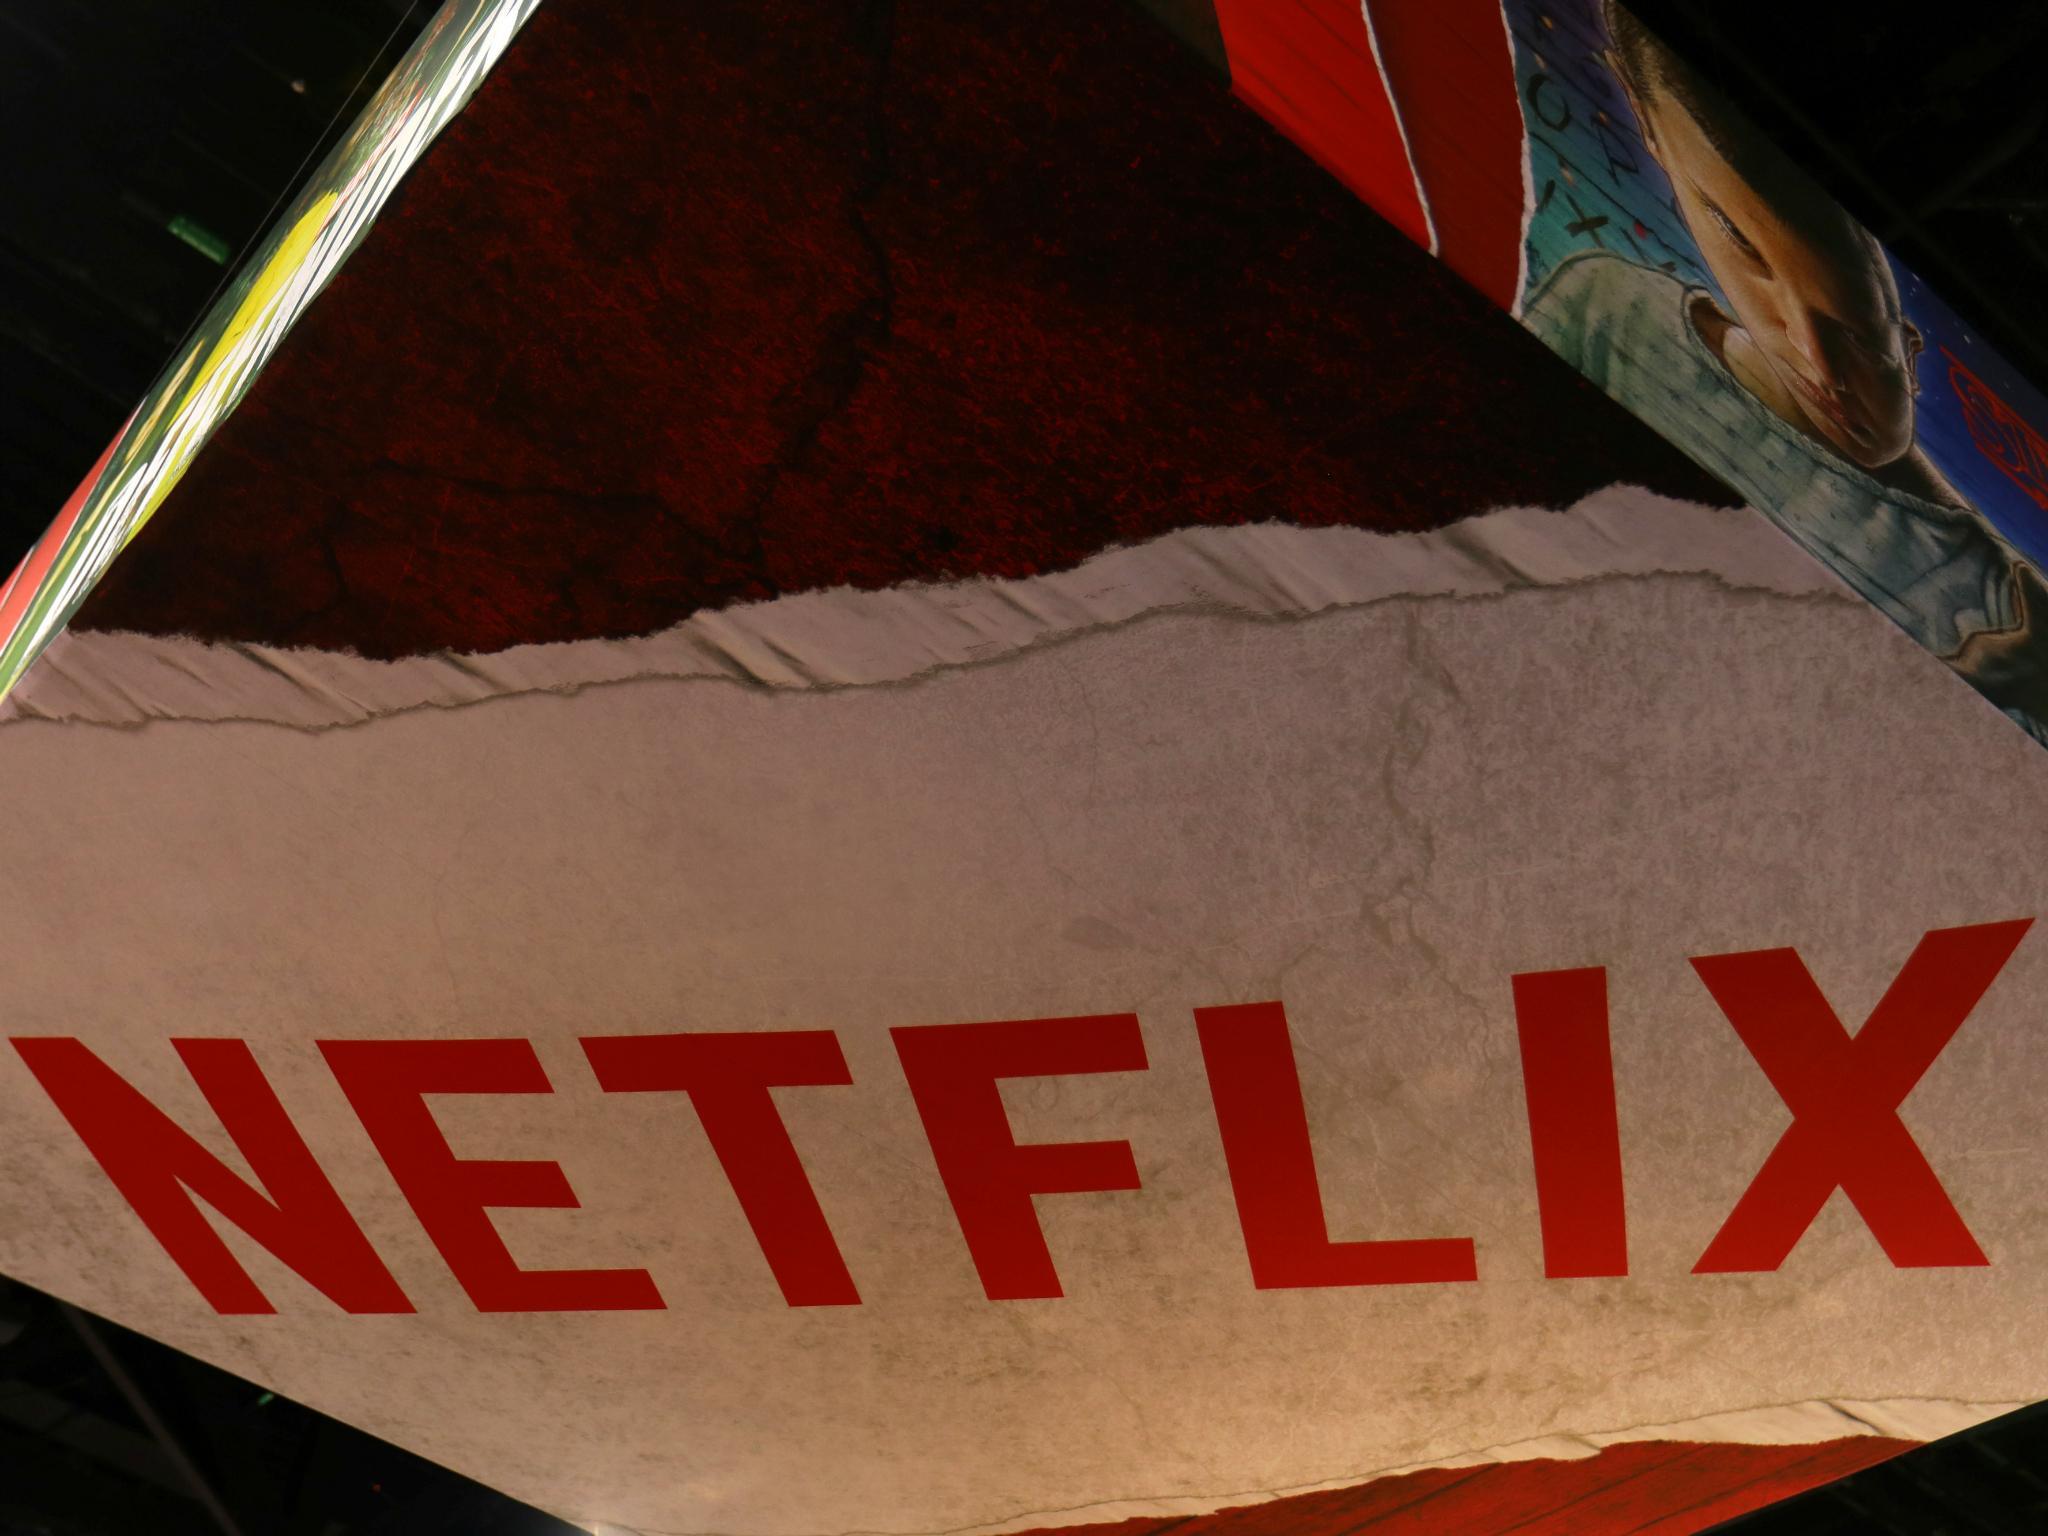 The Netflix logo is shown above their booth at Comic Con International in San Diego, California, U.S., July 21, 2017